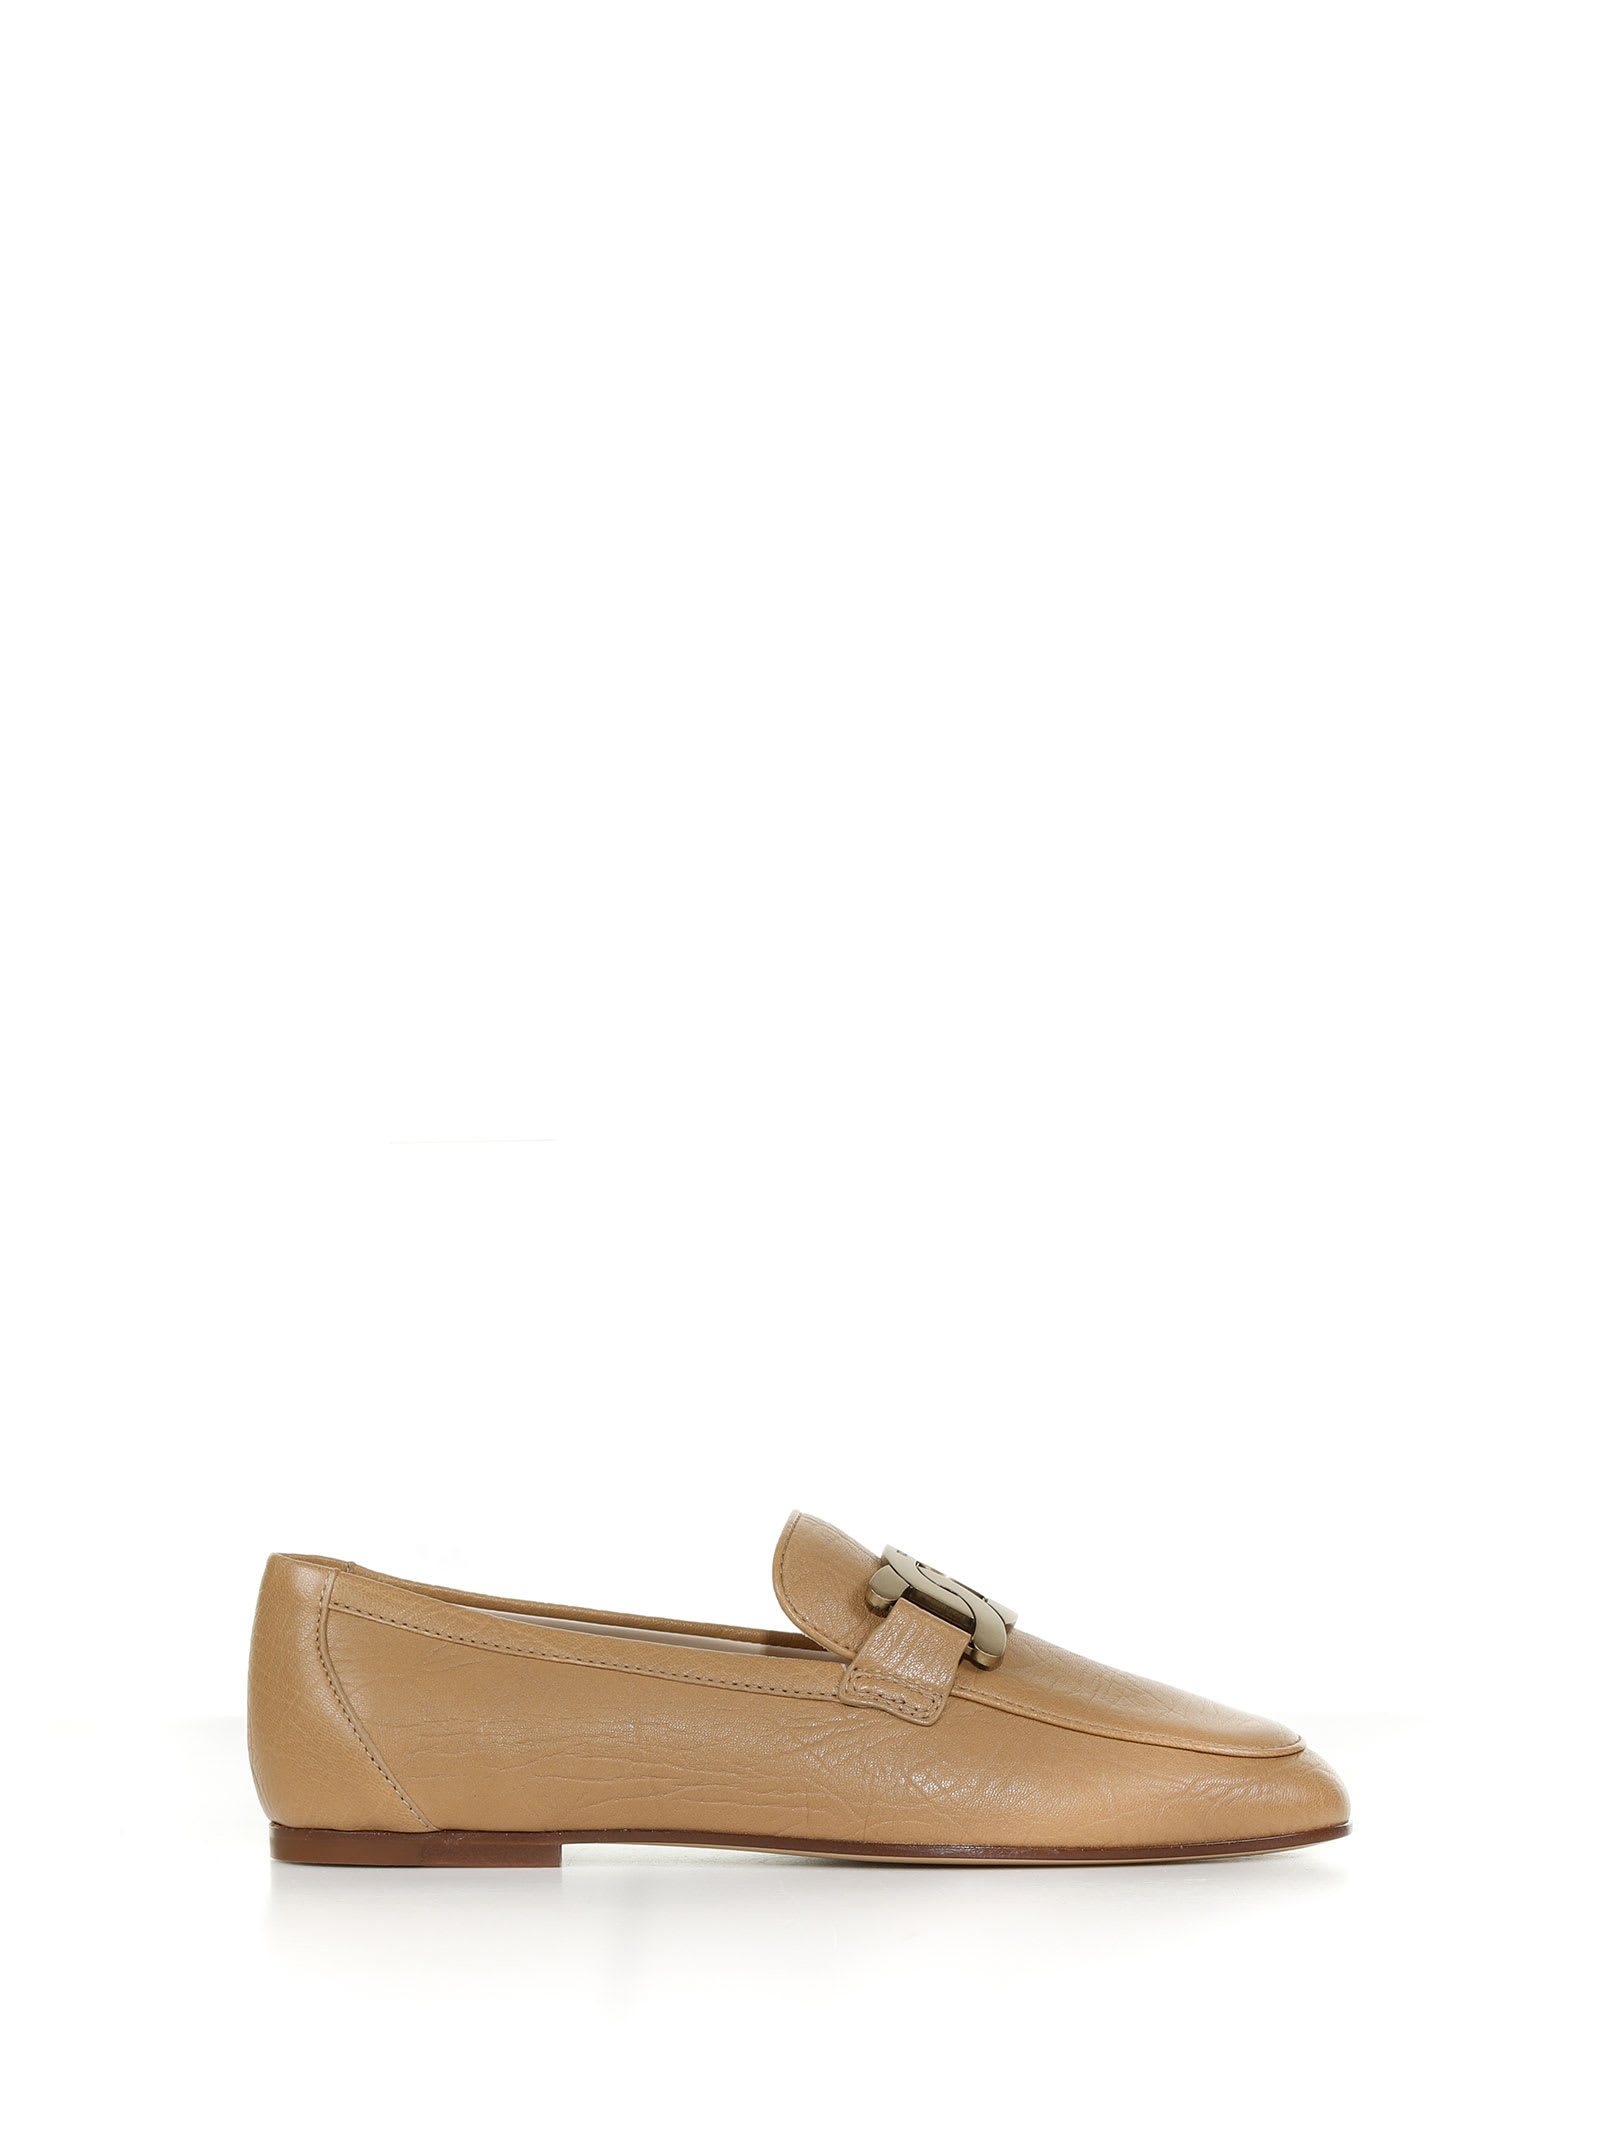 Tods Kate Loafer | ModeSens